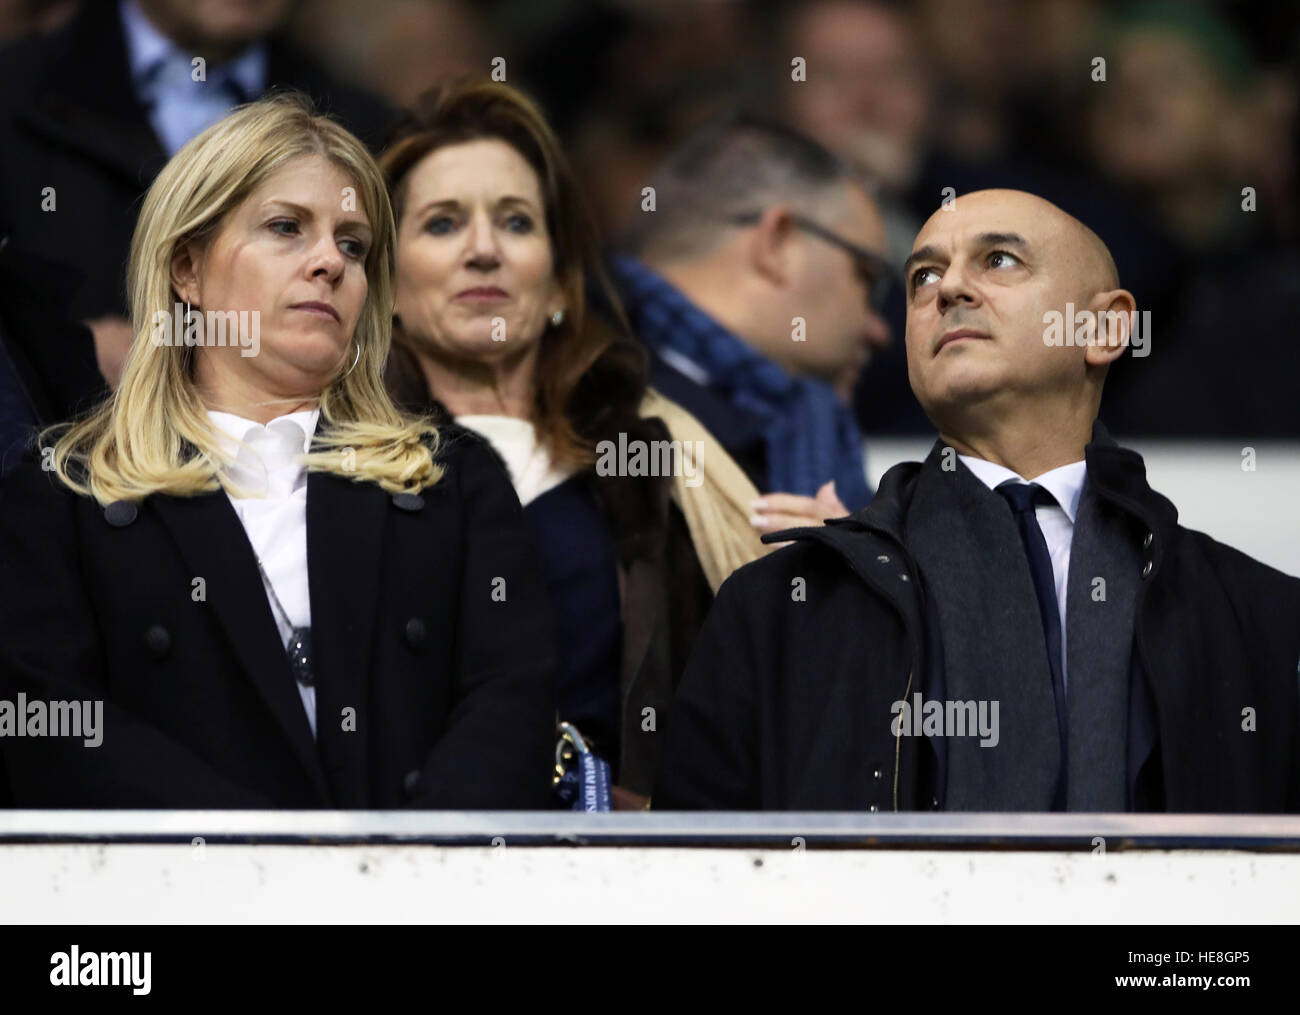 Tottenham Hotspur Daniel Levy his wife Tracey in the stands during the Premier League match White Hart Lane, London Stock Photo - Alamy